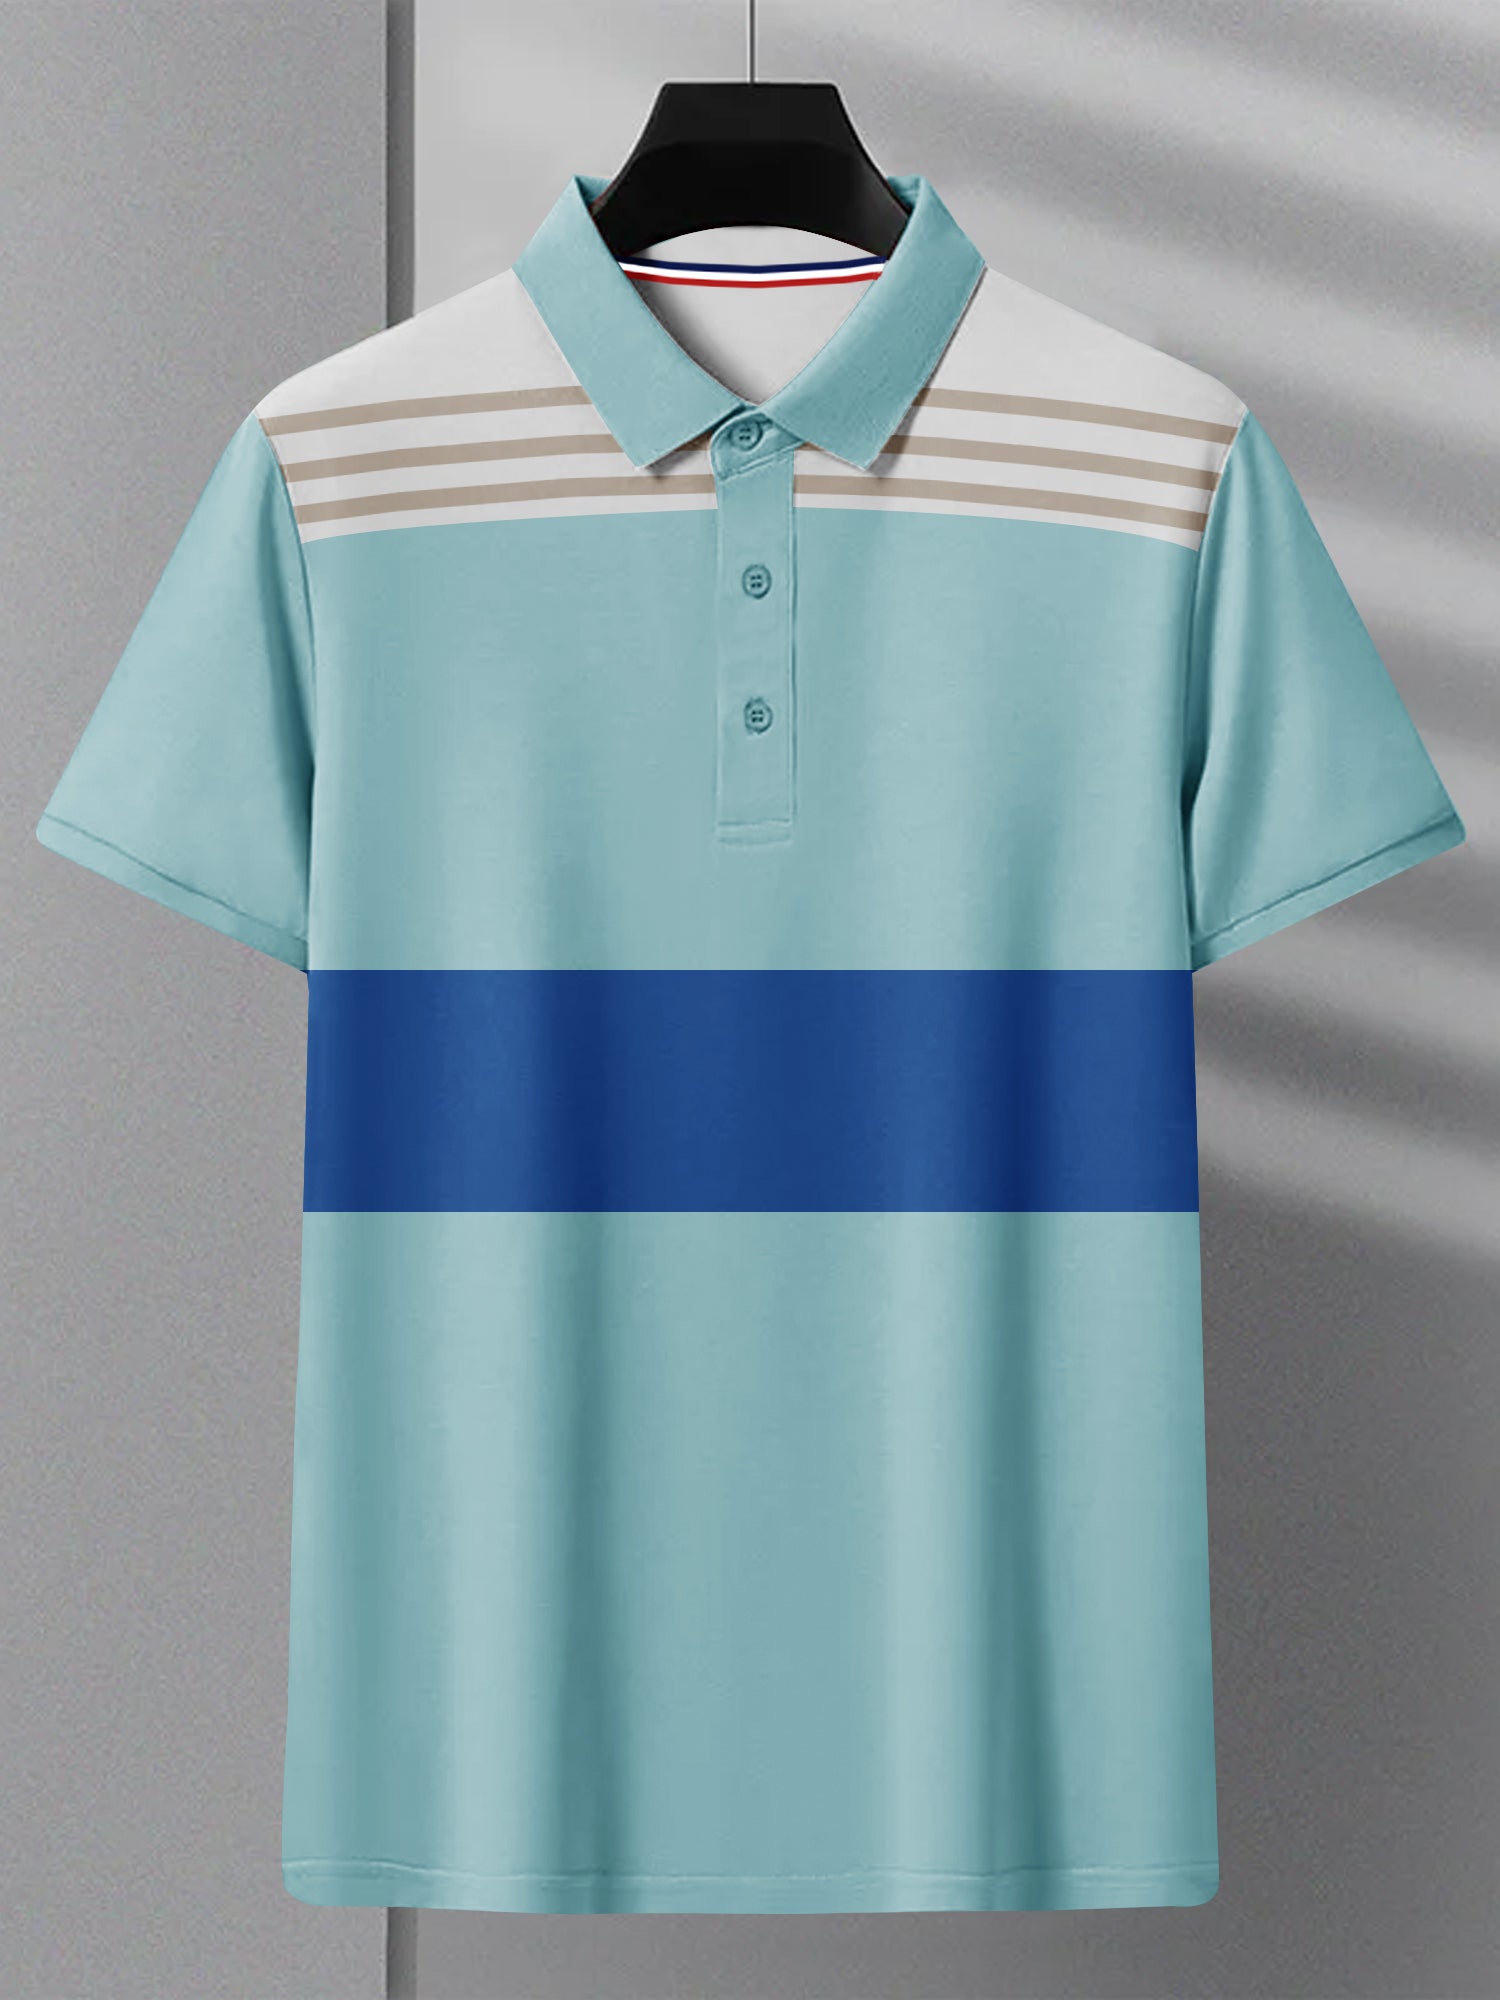 NXT Summer P.Q Polo Shirt For Men-Sky With Blue & White Stripes-SP1438/RT2326